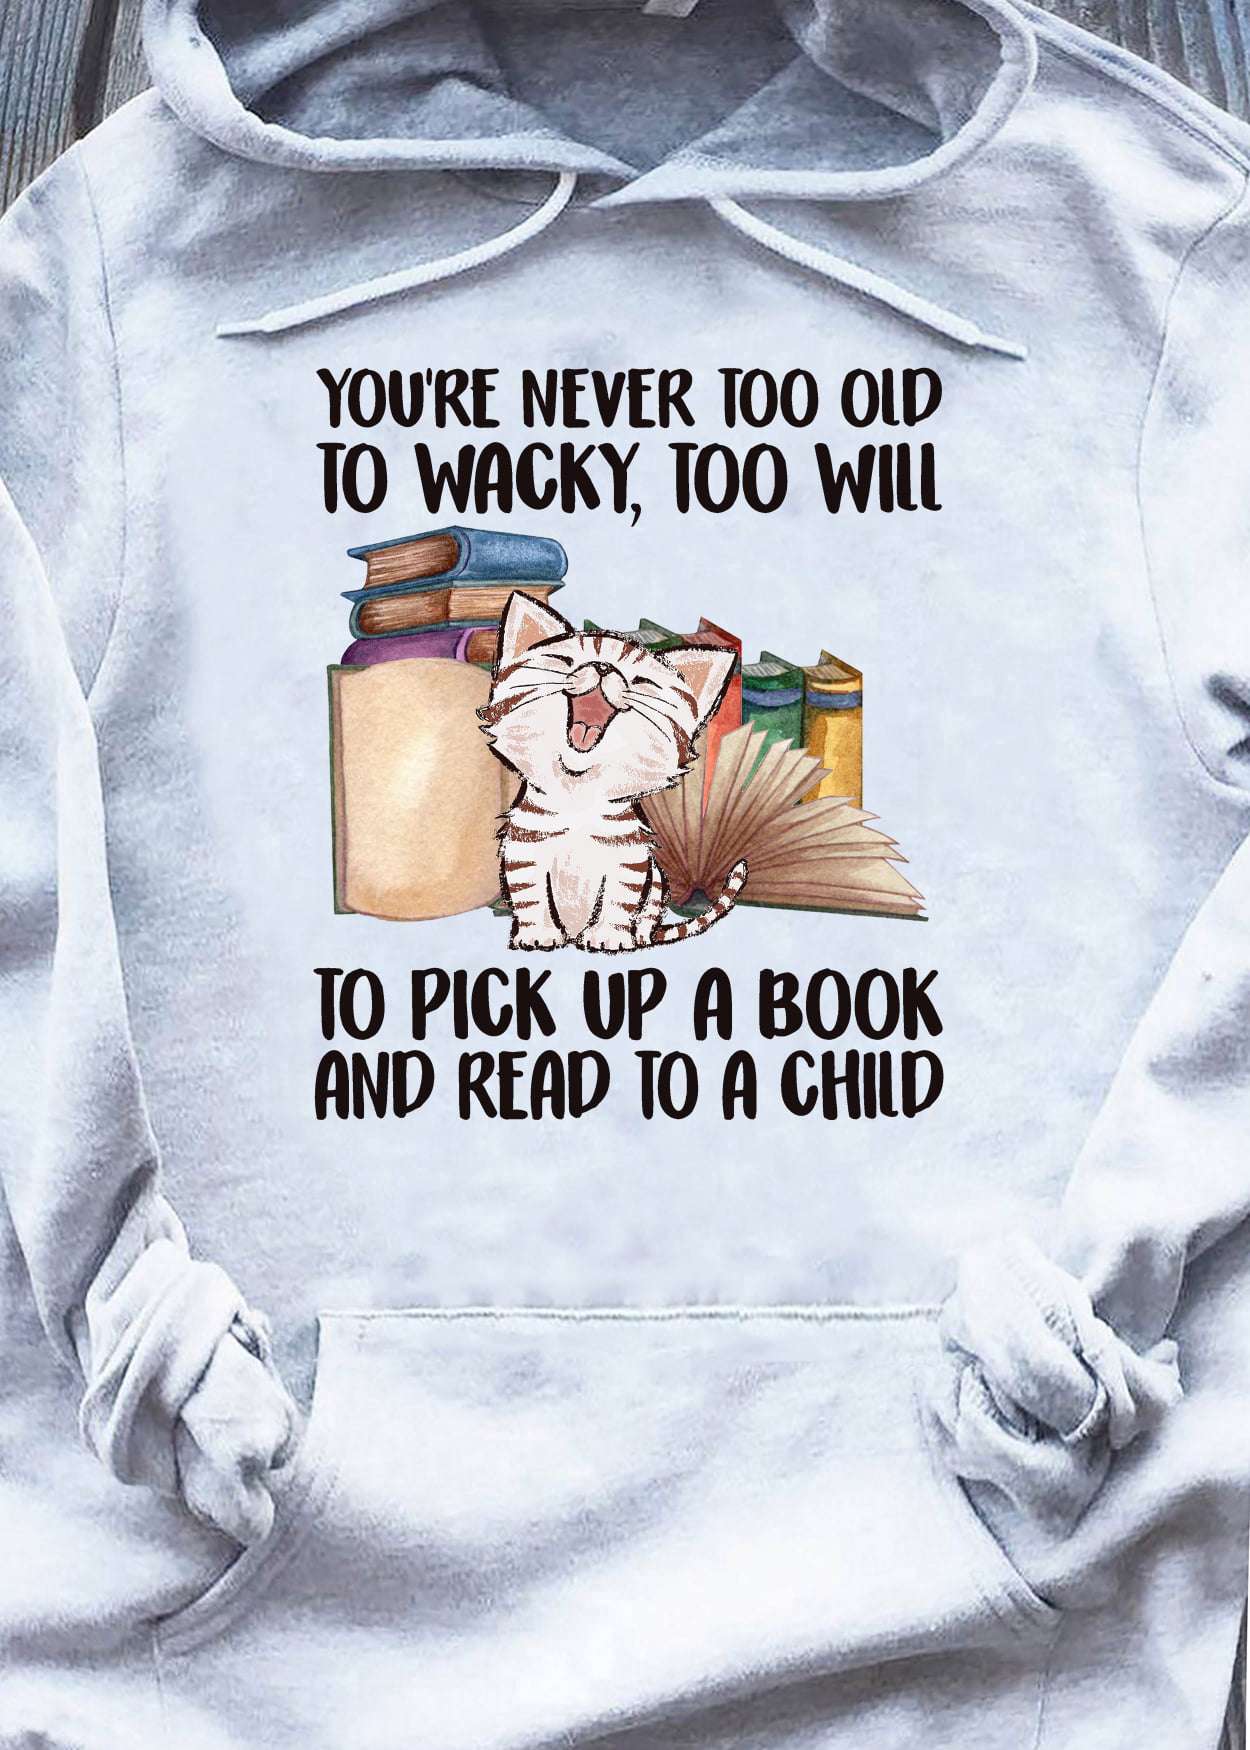 You're never too old to wacky, too will to pick up a book and read to a child - Reading book the hobby